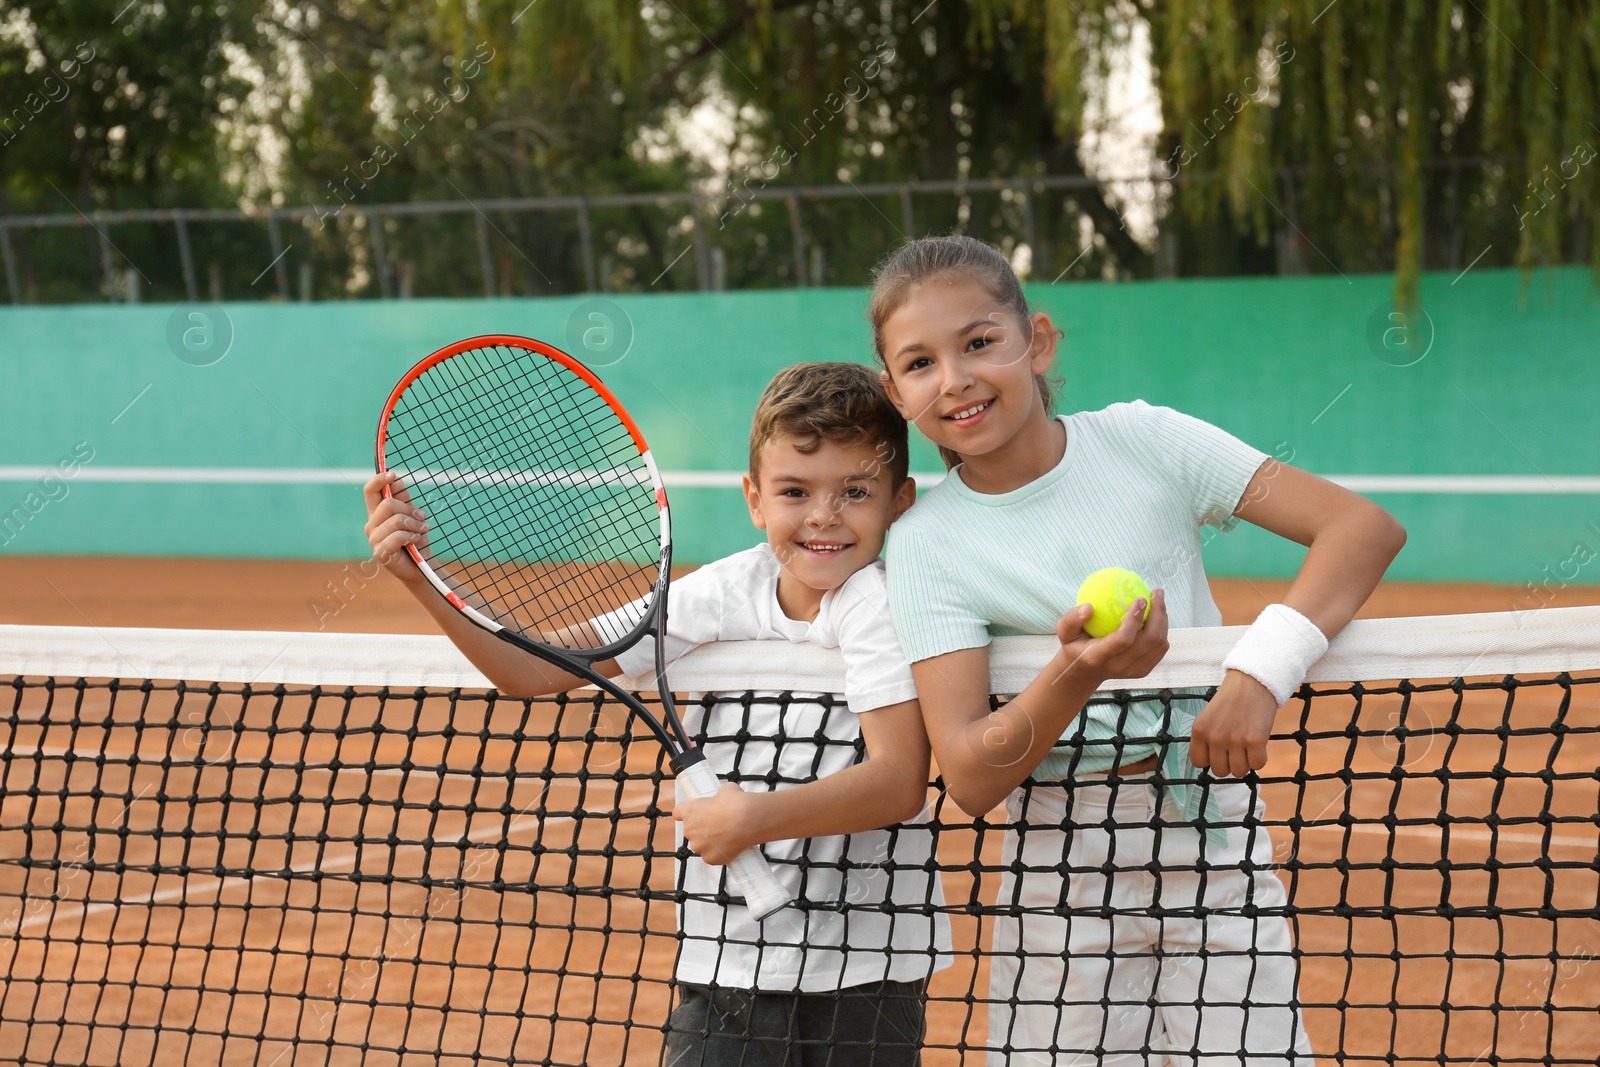 Photo of Happy children with tennis racket and ball on court outdoors